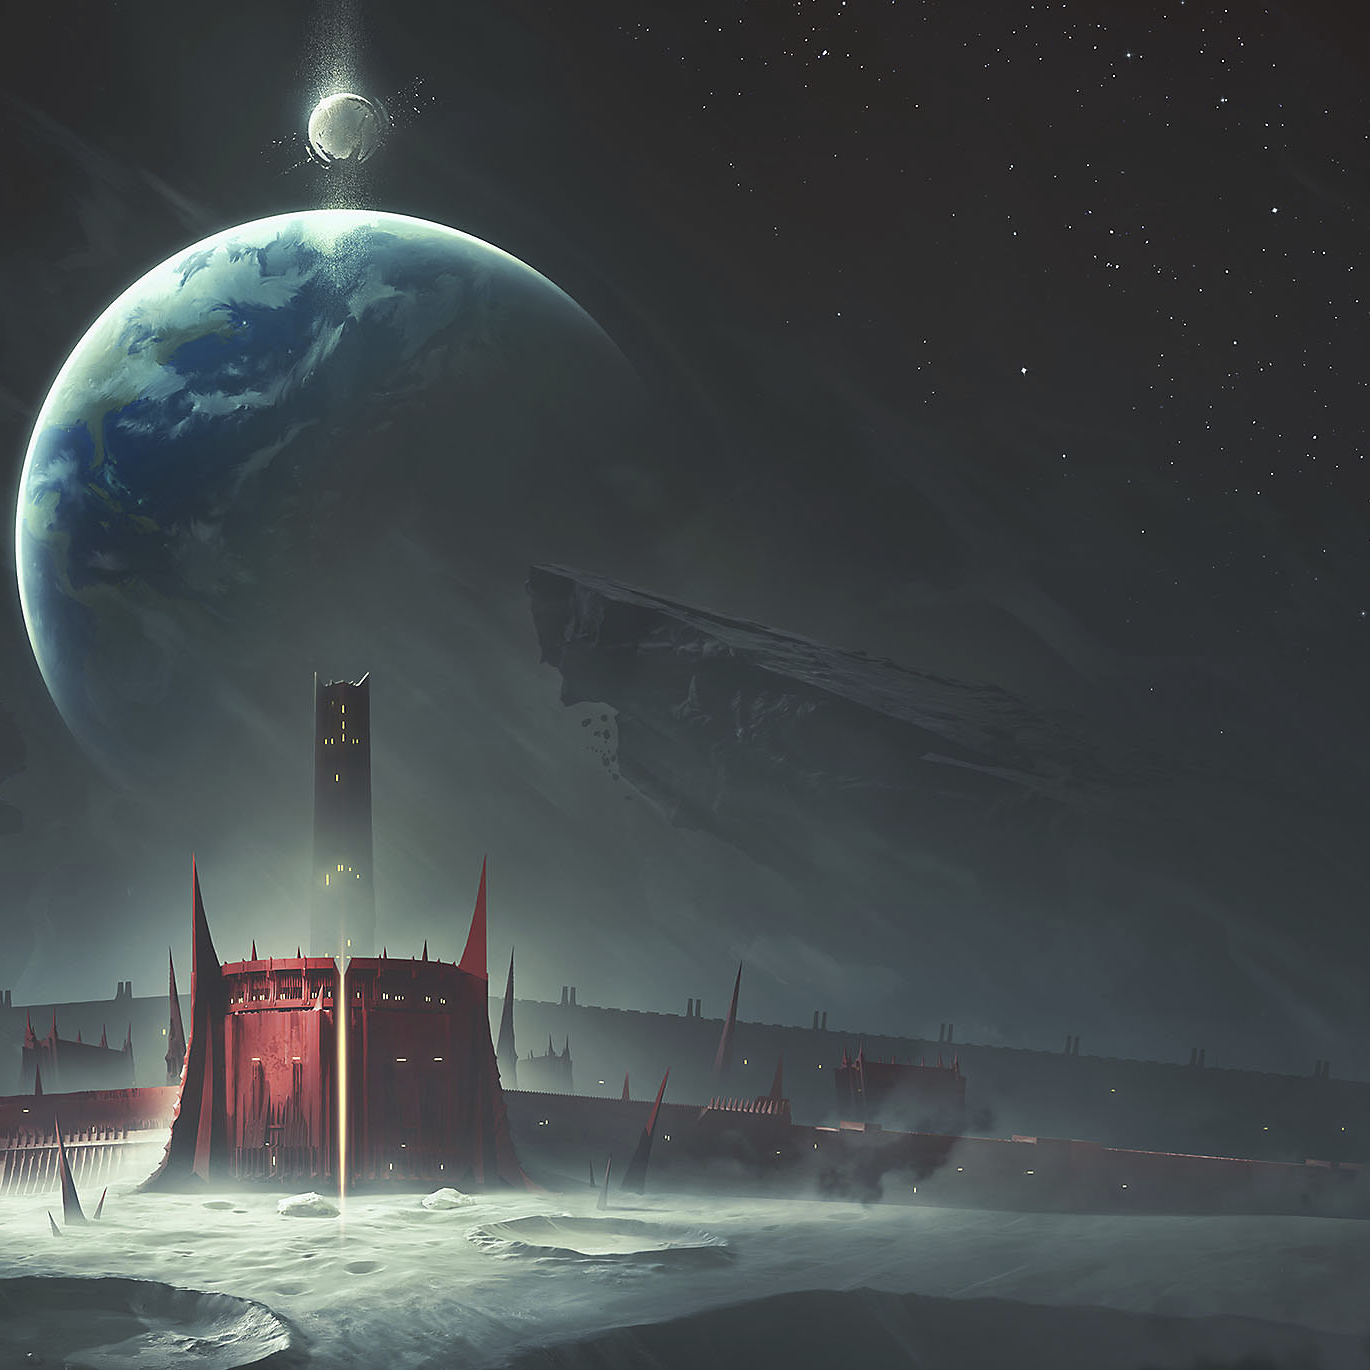 Destiny 2 - Shadowkeep artwork showing a red building on a lunar-style setting